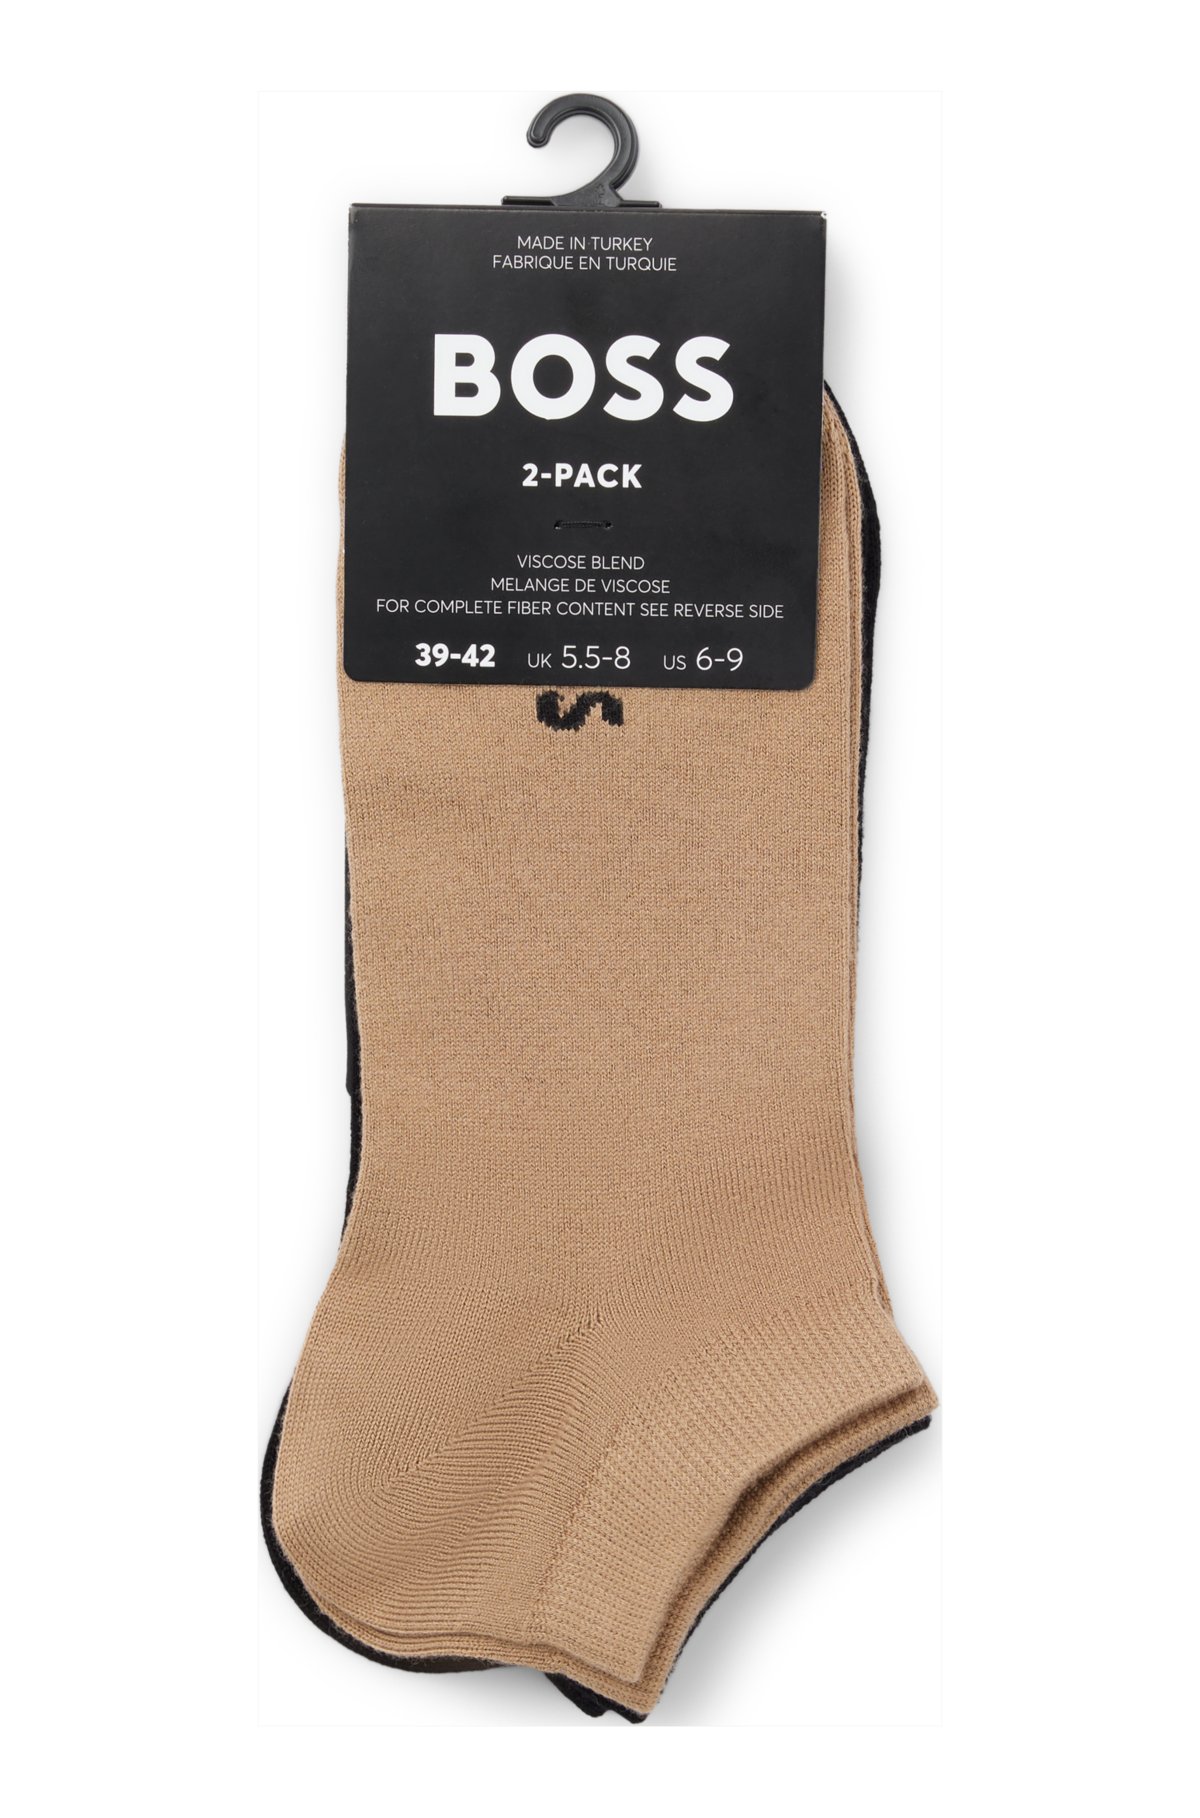 Two-pack of ankle-length socks with logo details, Beige